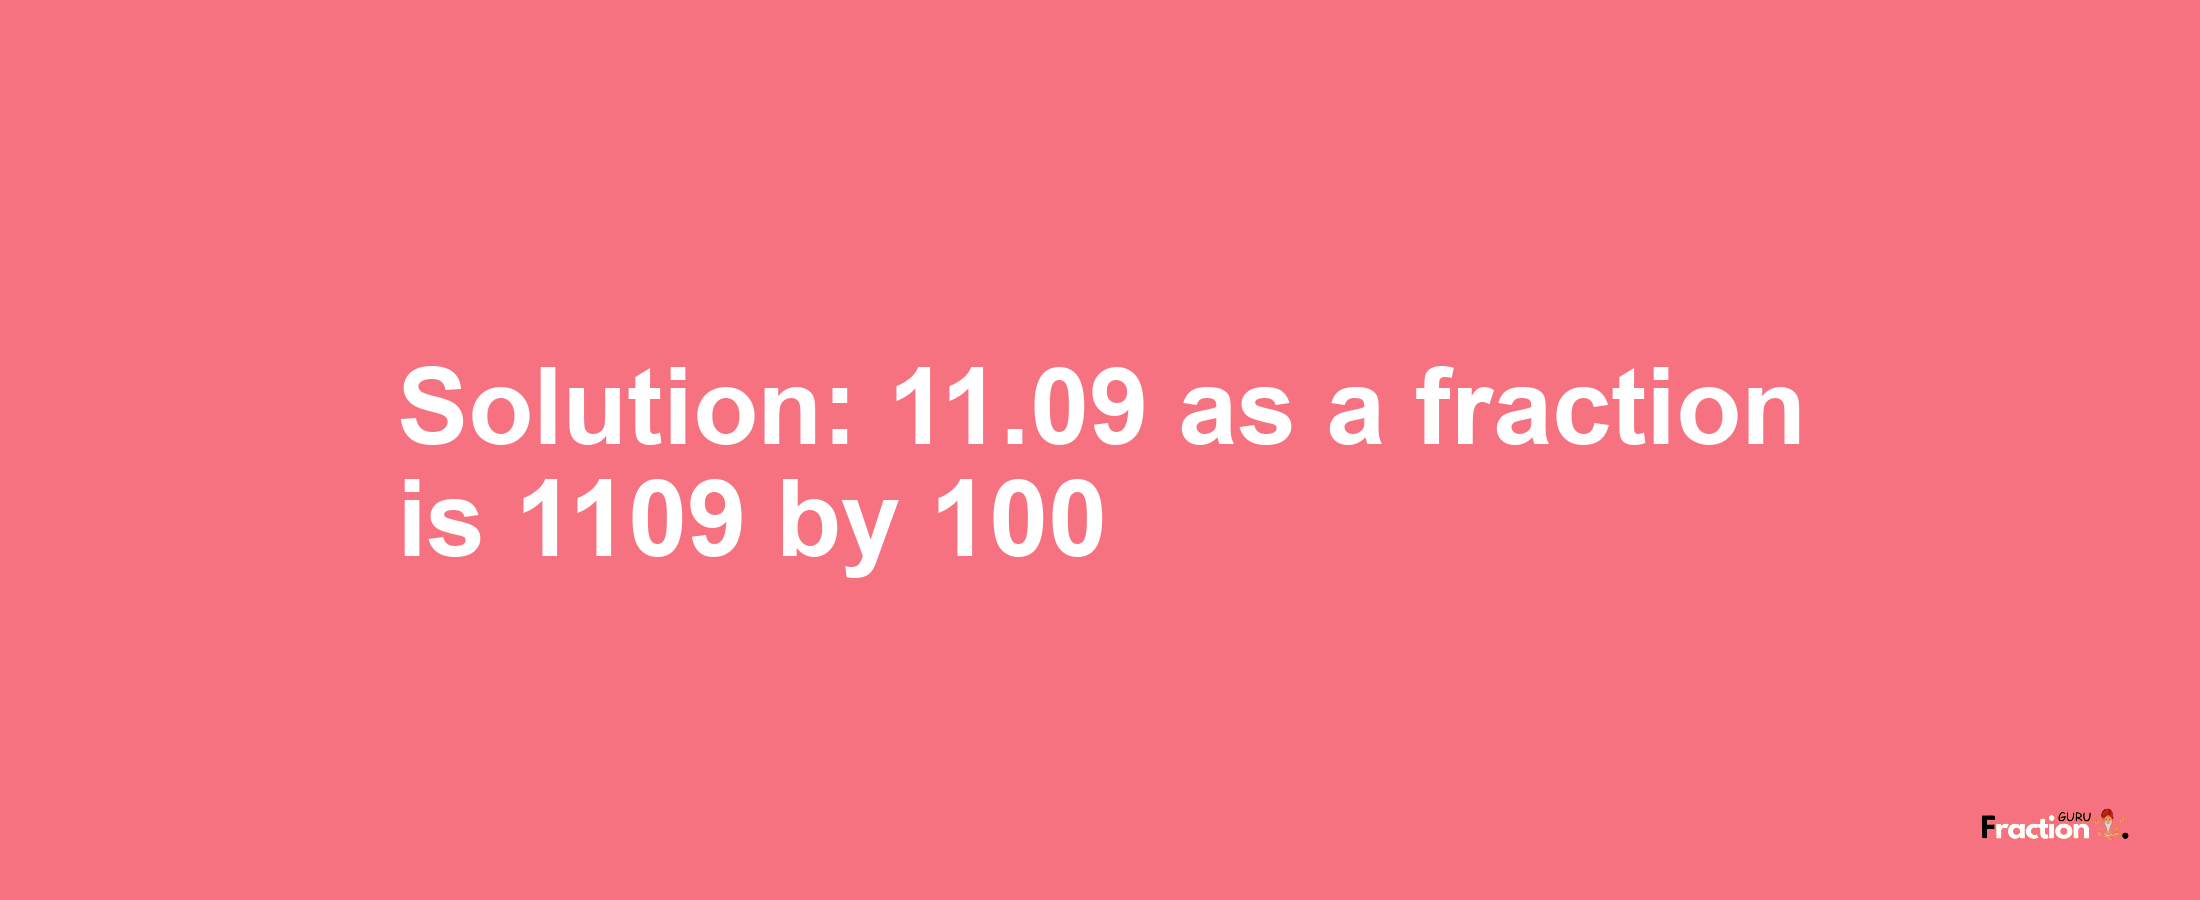 Solution:11.09 as a fraction is 1109/100